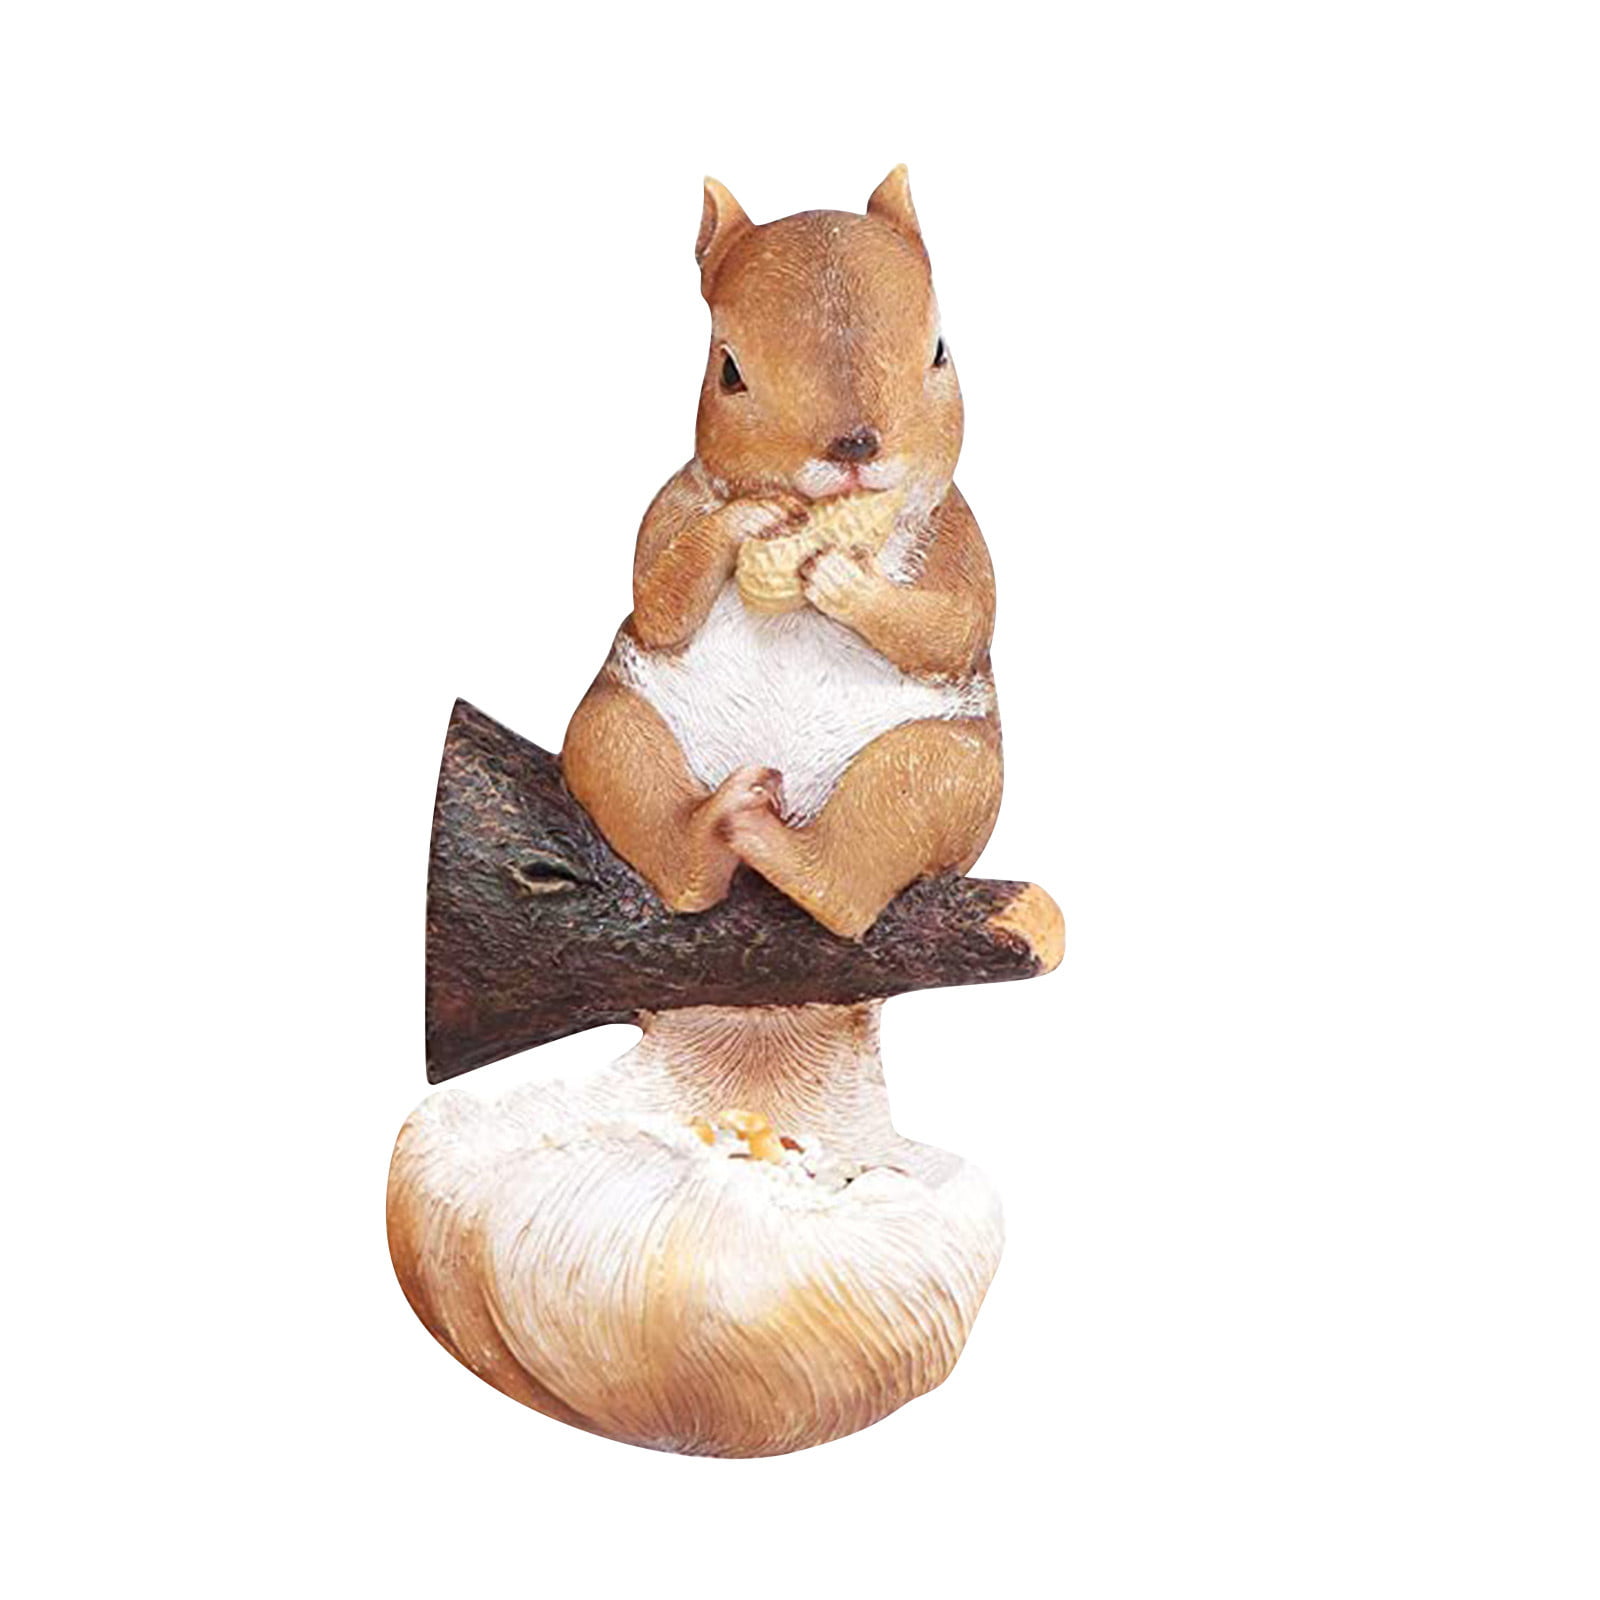 Hide a Spare Key Holder Squirrel Large Ornament Keeper Safely Hiding Key or Important Items Outdoor Lawn Yard Animal Figurine Sculpture Ornament Décor